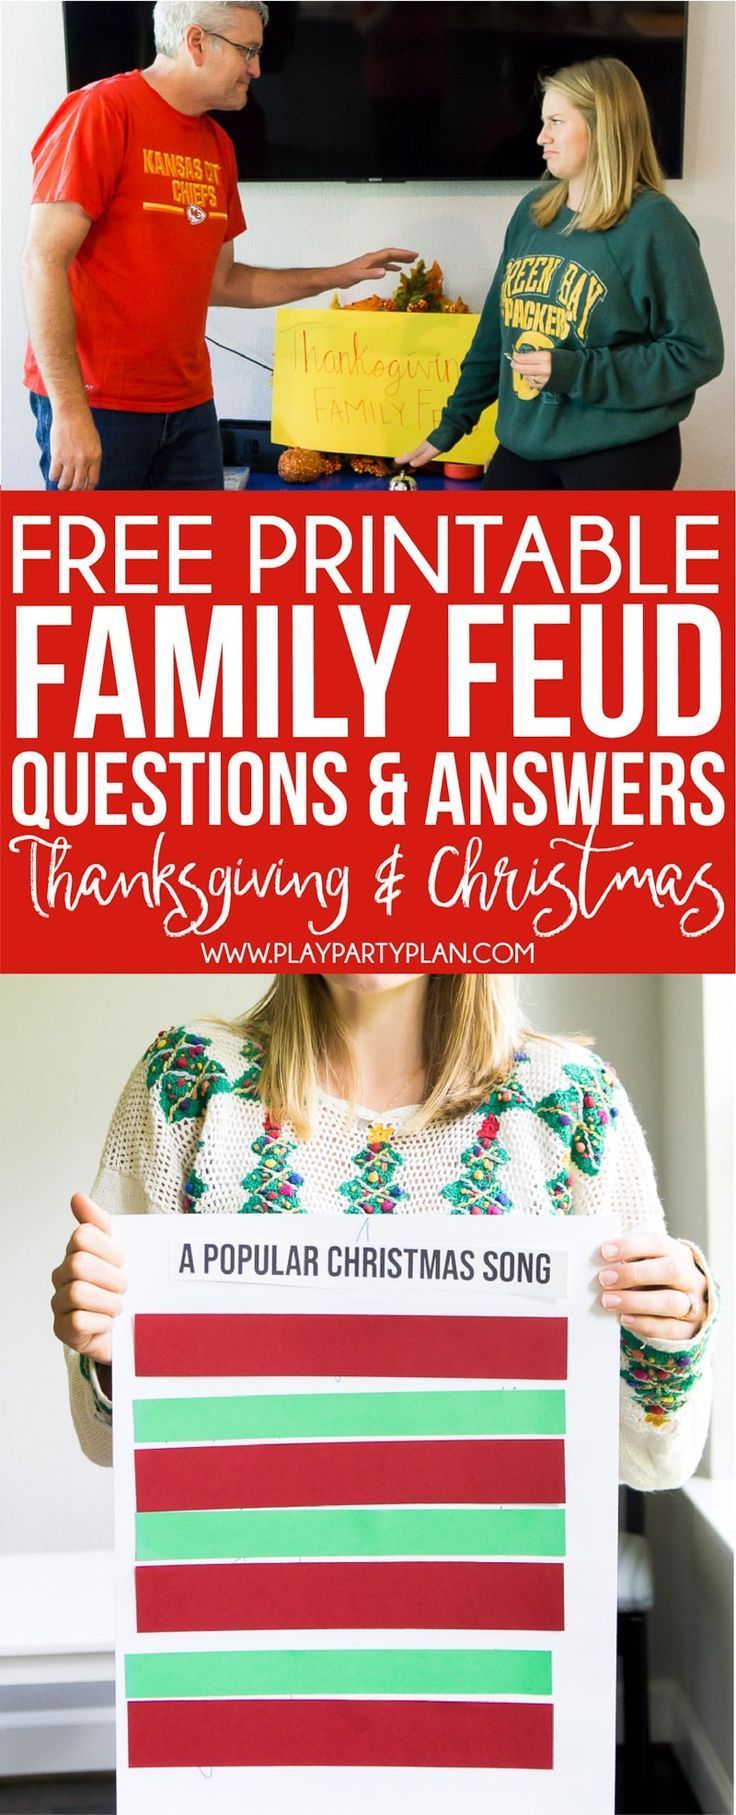 FREE Holiday Family Feud Game (Thanksgiving & Christmas Questions) -   17 holiday Party home ideas